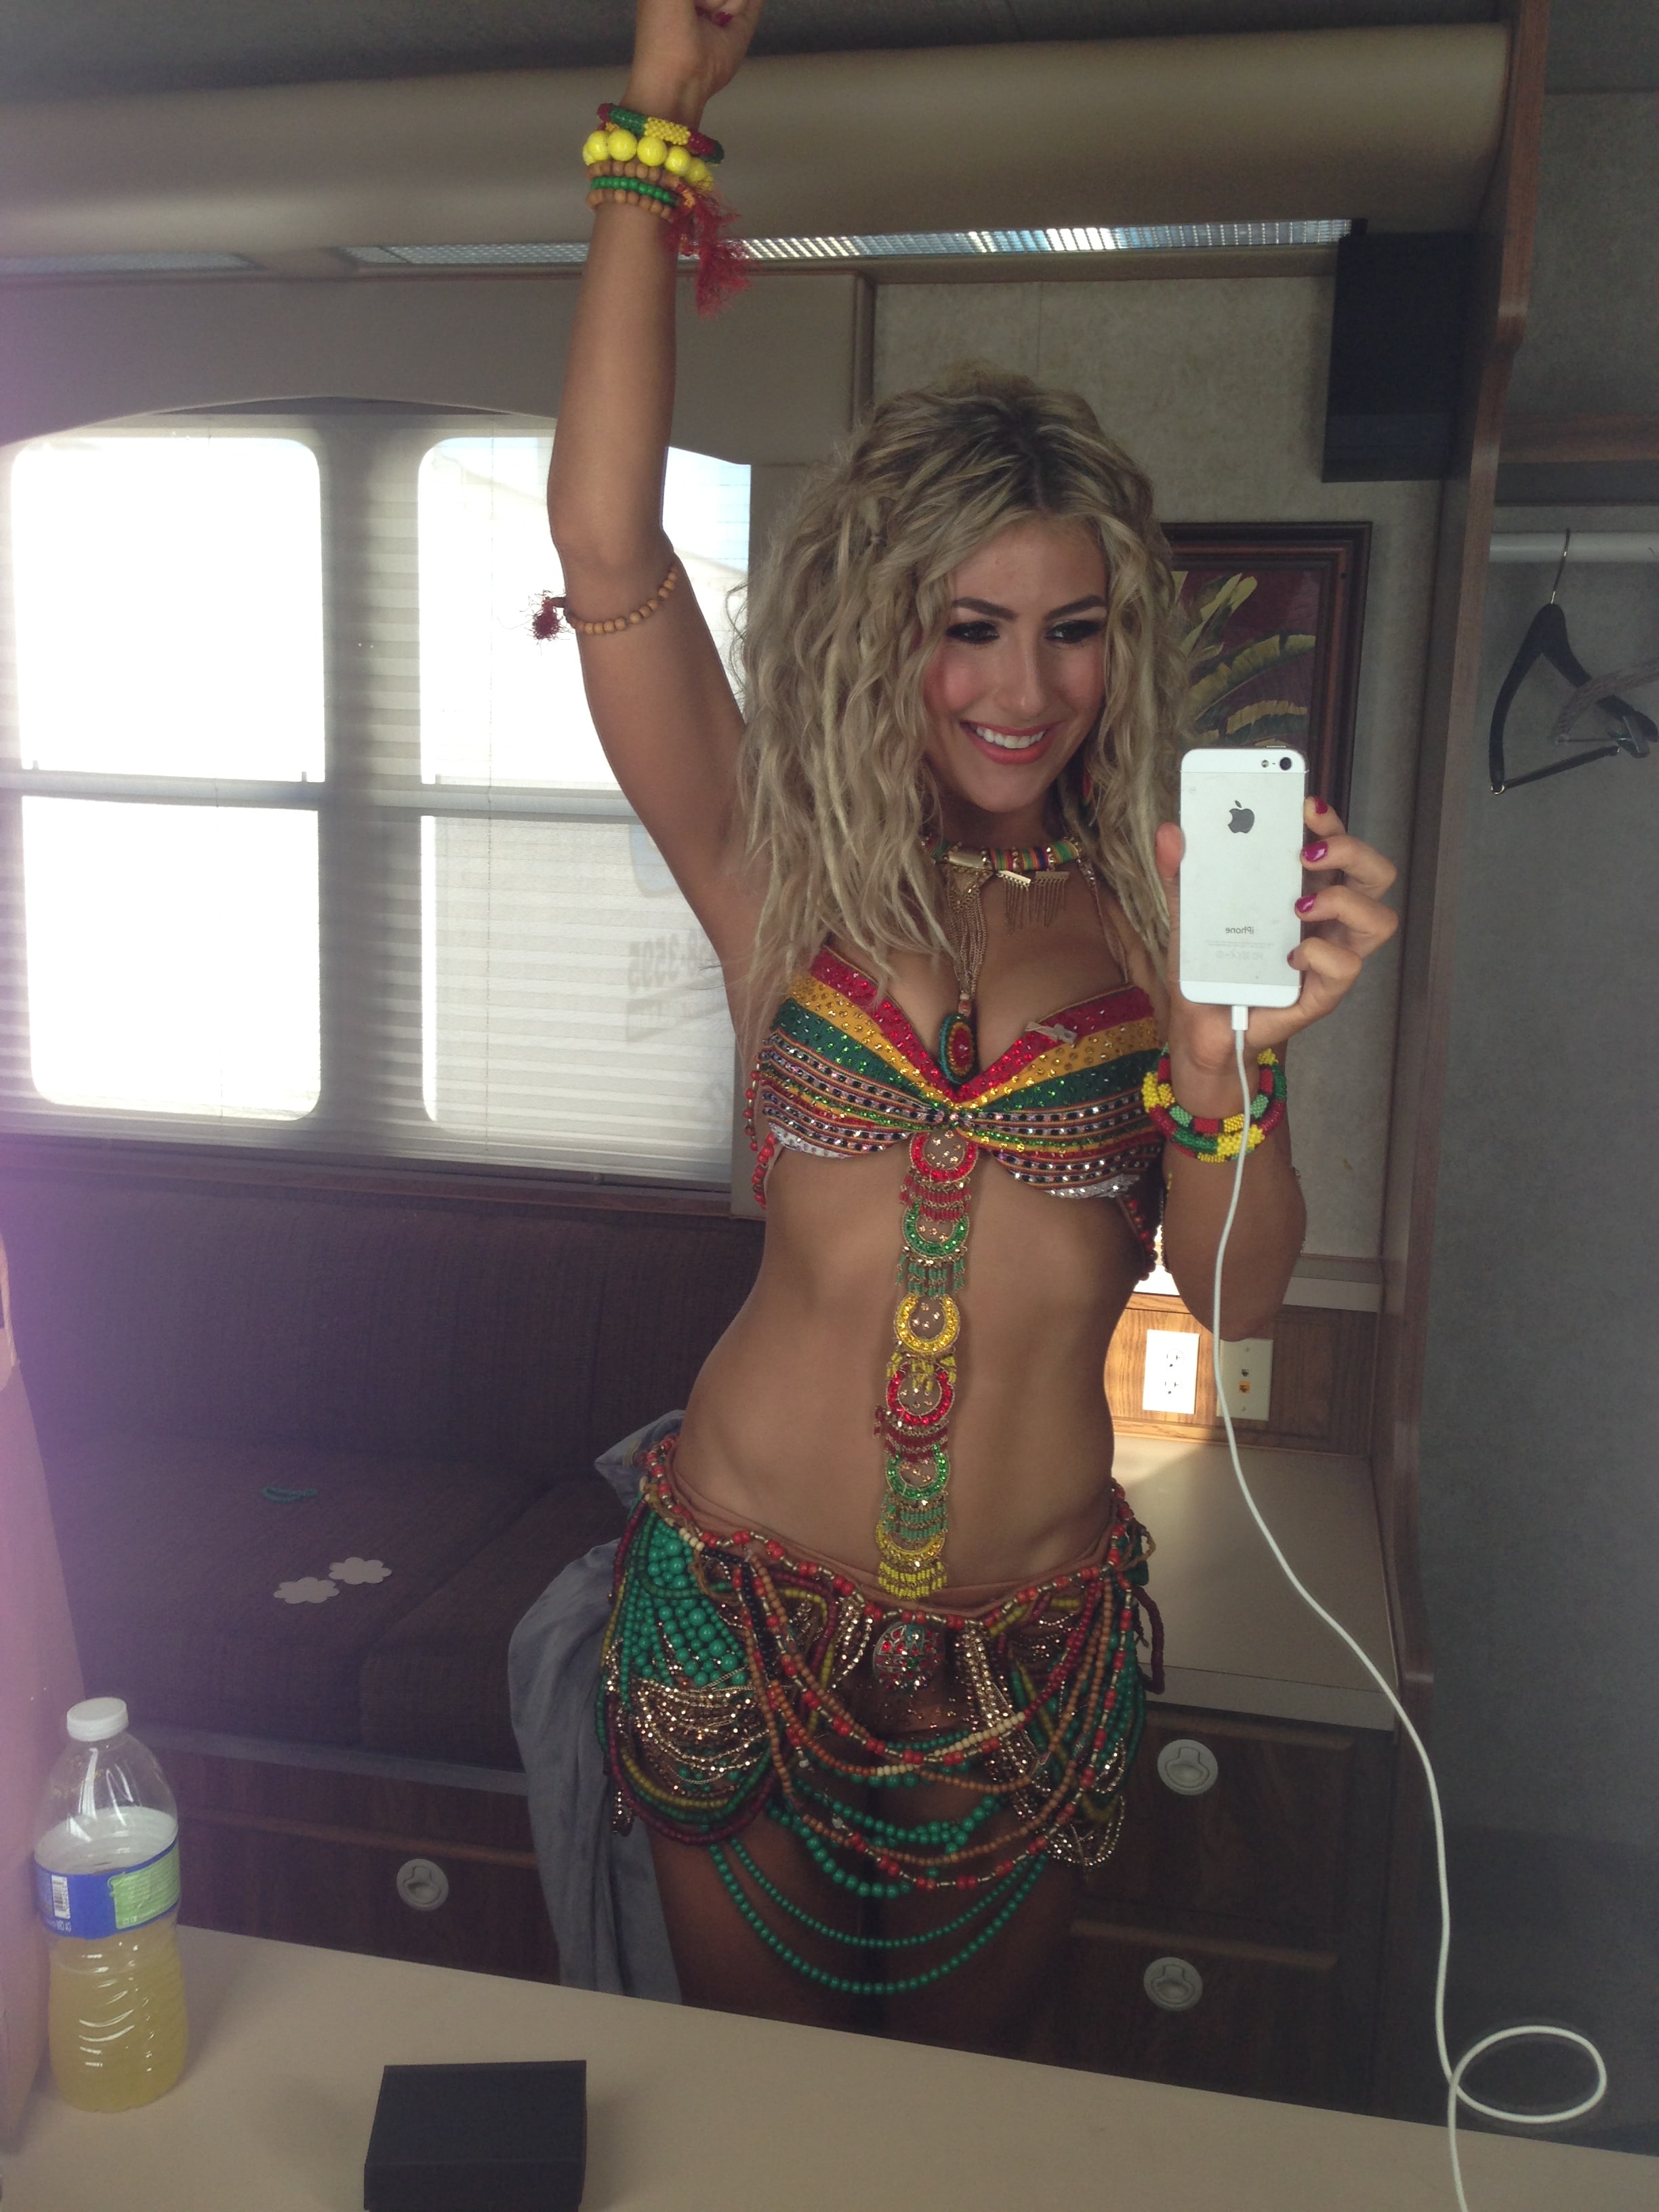 Emma Slater’s Leaked Pictures Shock The World